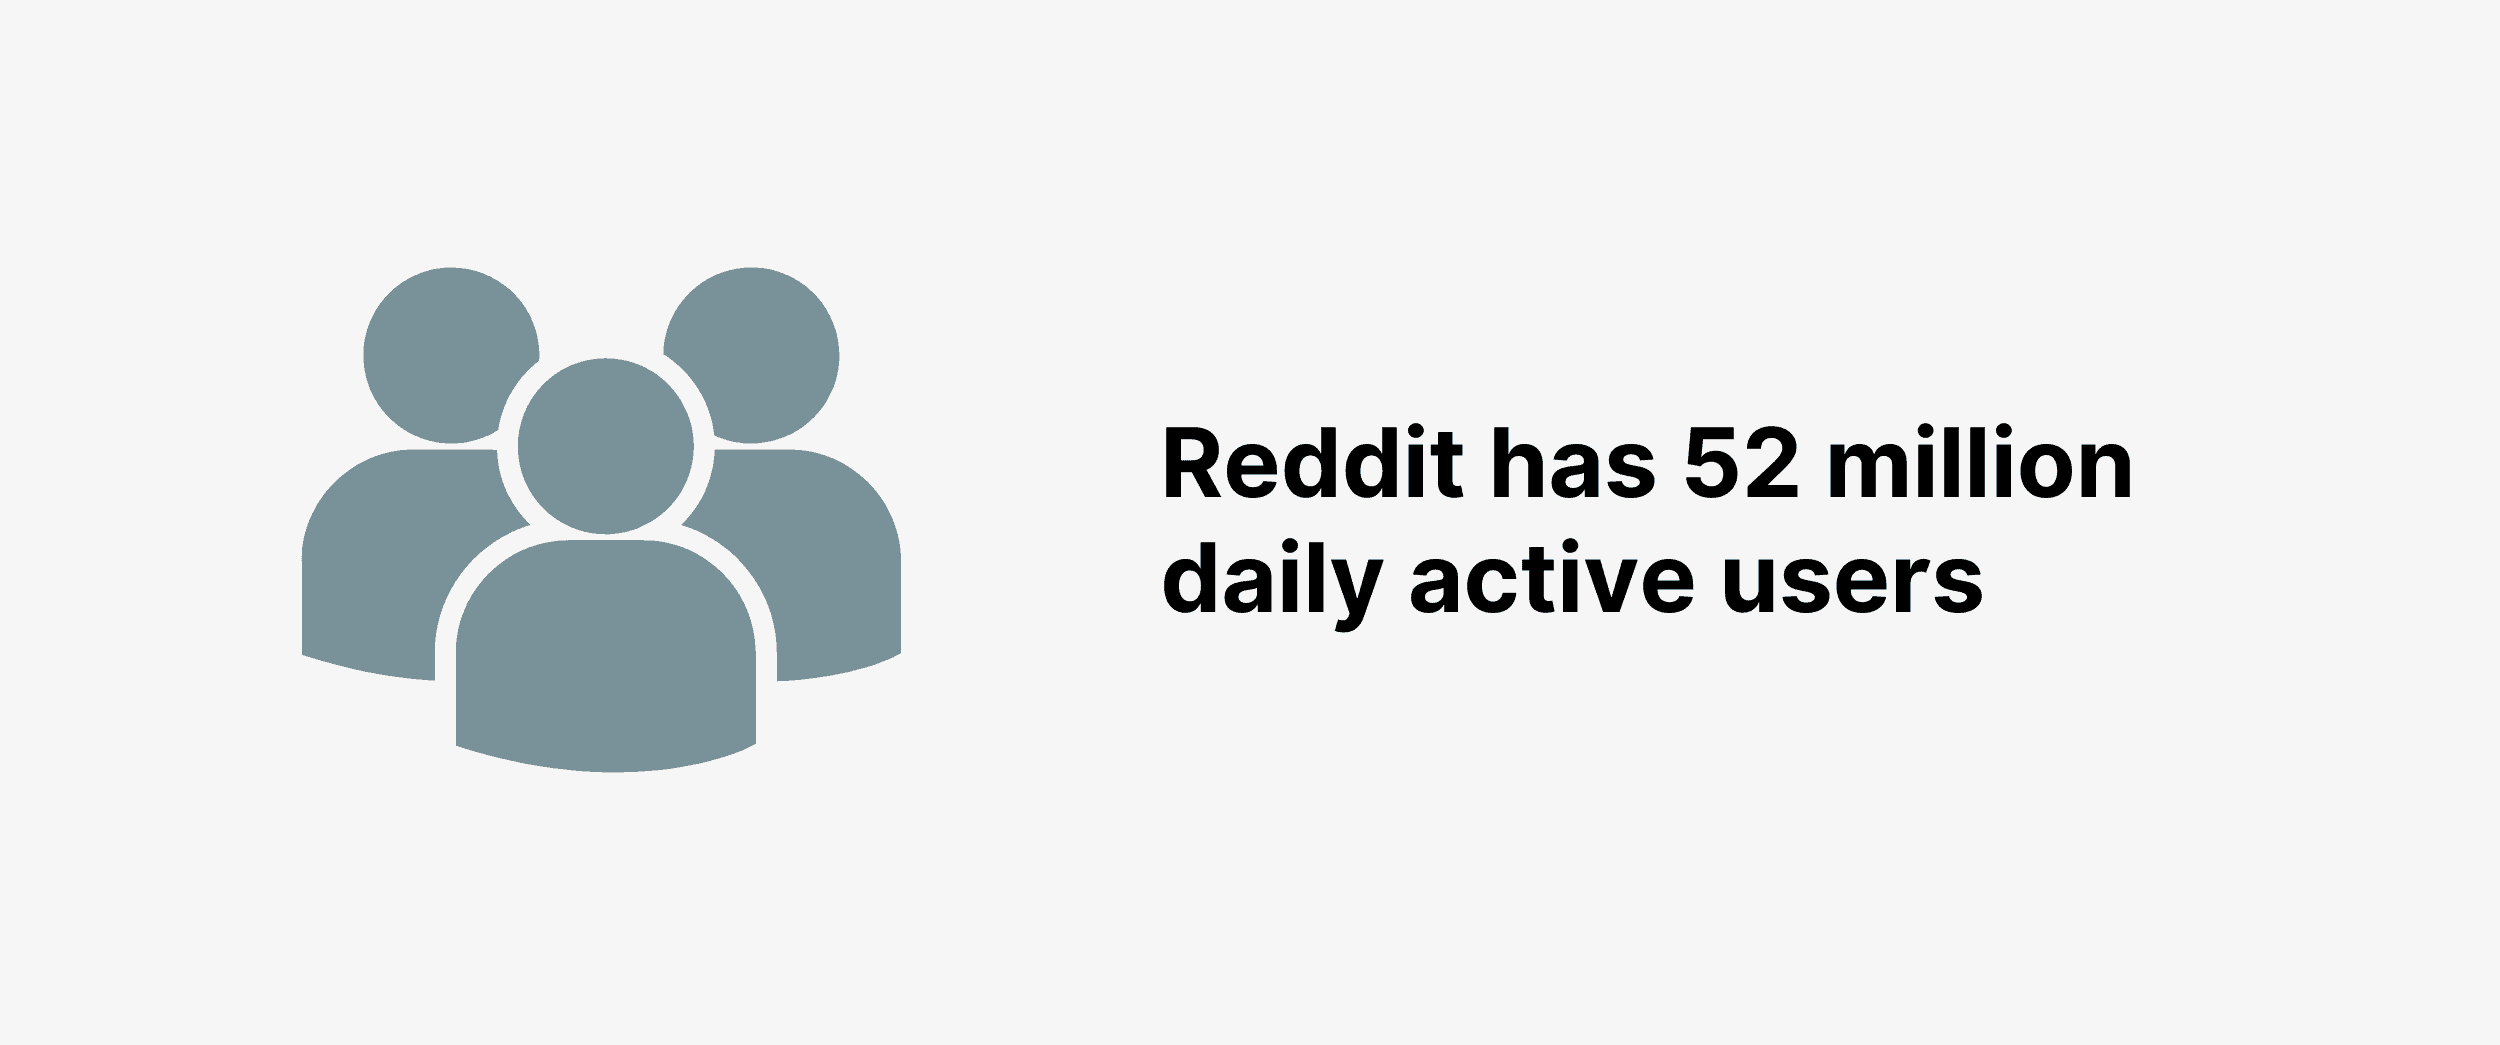 Reddit has 52 million daily active users